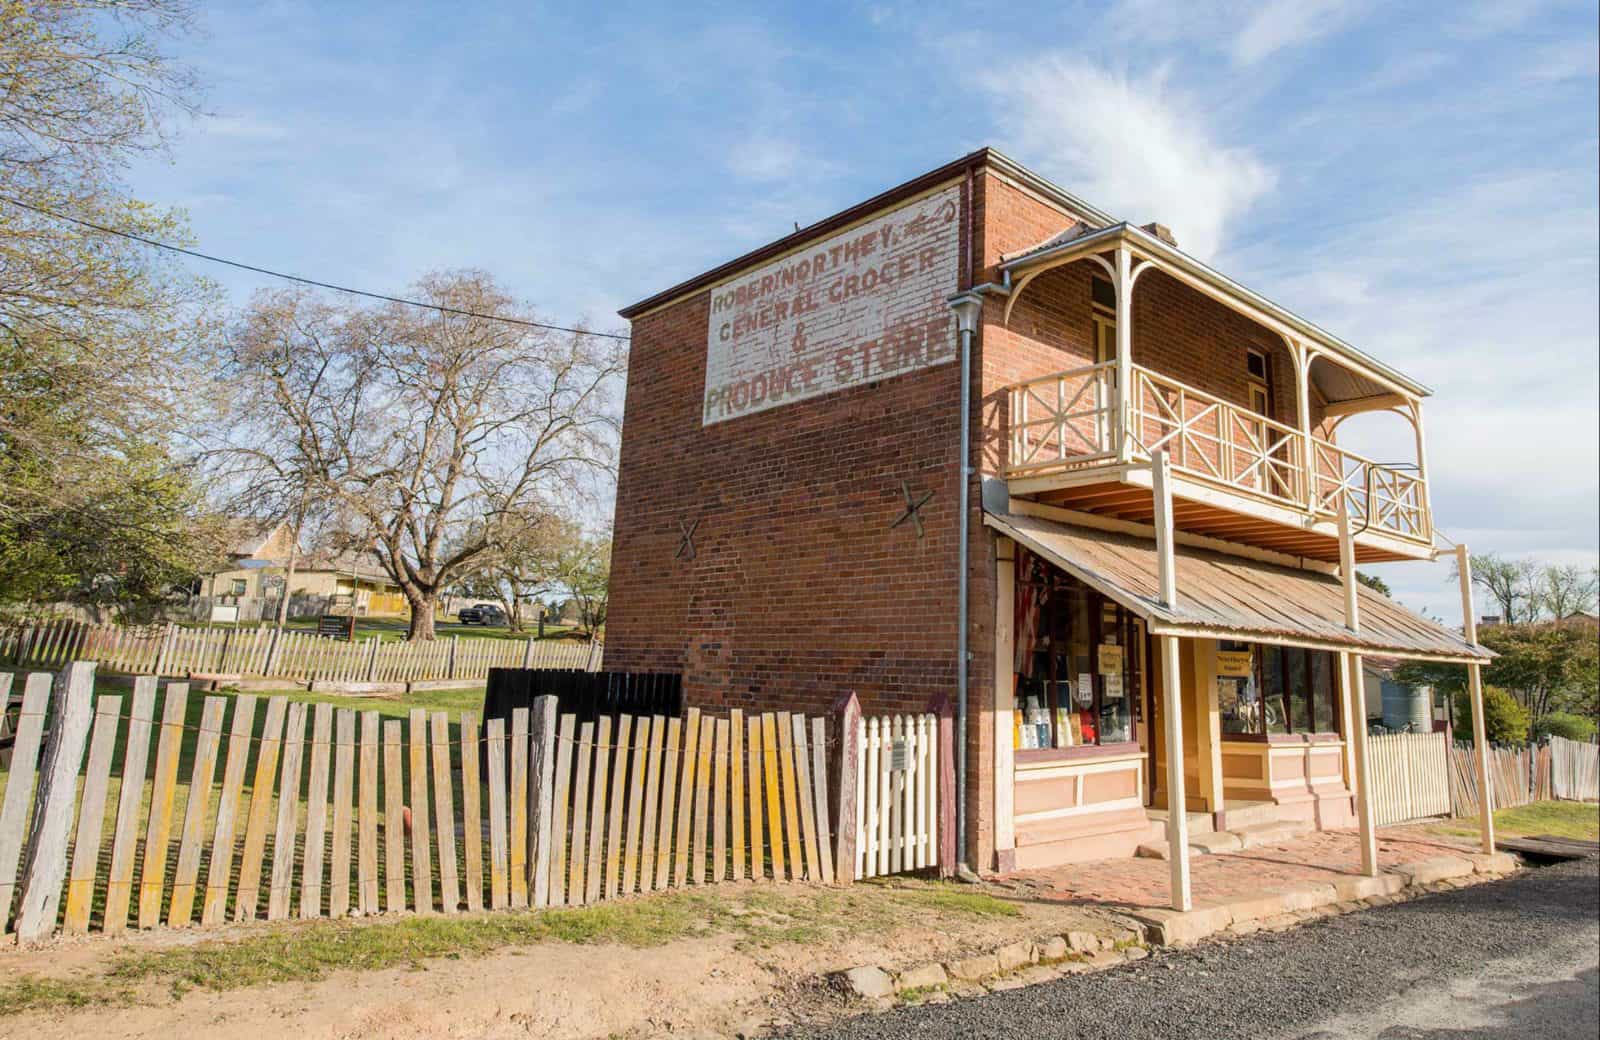 Northeys Store, Hill End Historic Site. Photo: John Spencer